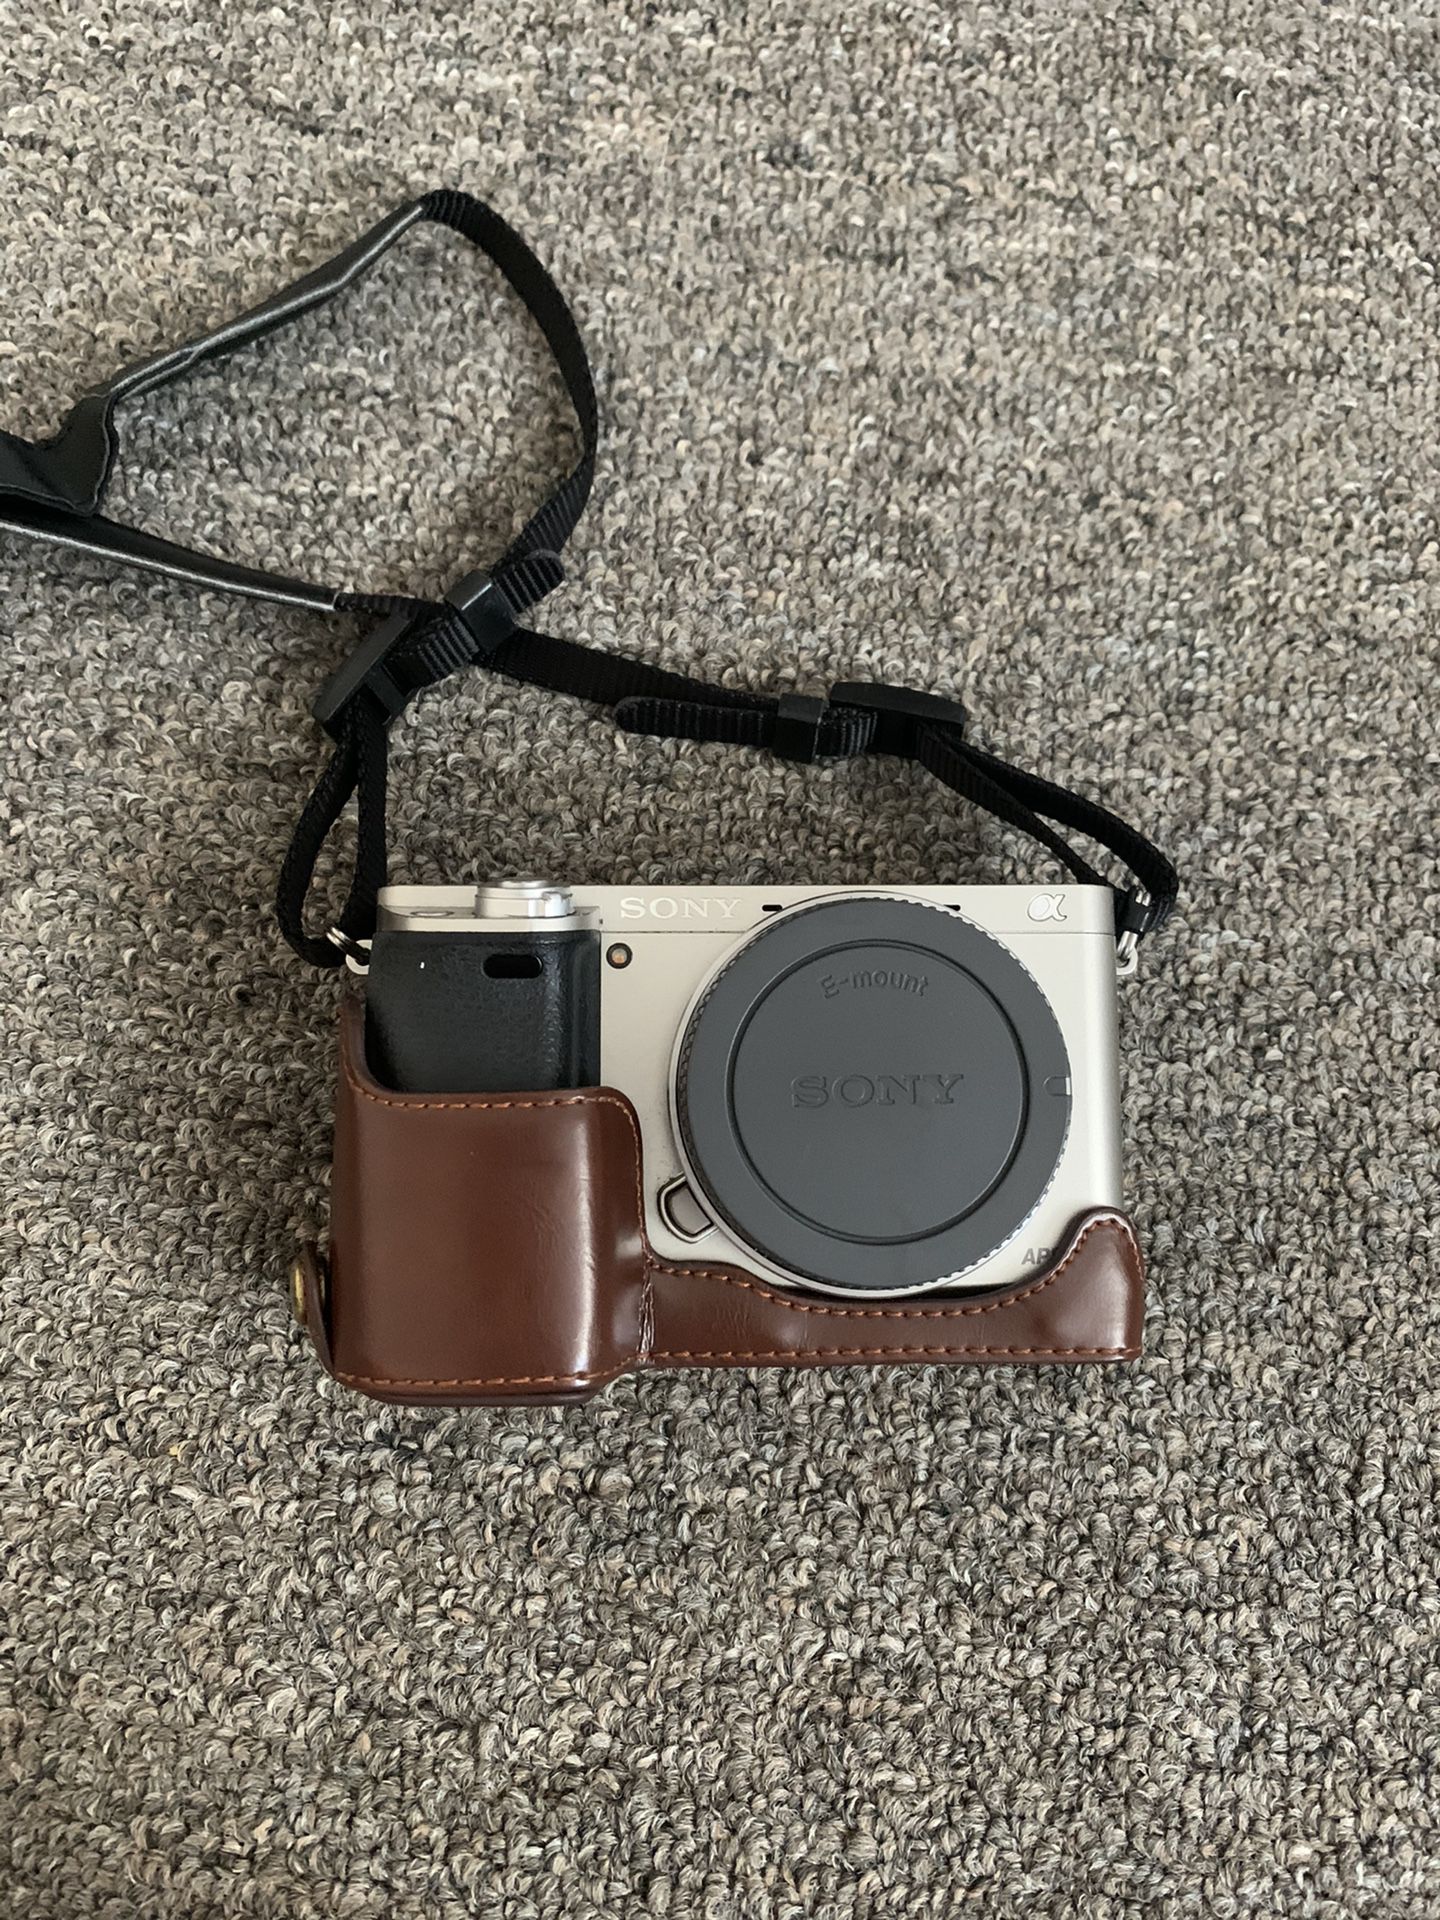 Sony A6000 (FREE LENS + ACCESORIES)